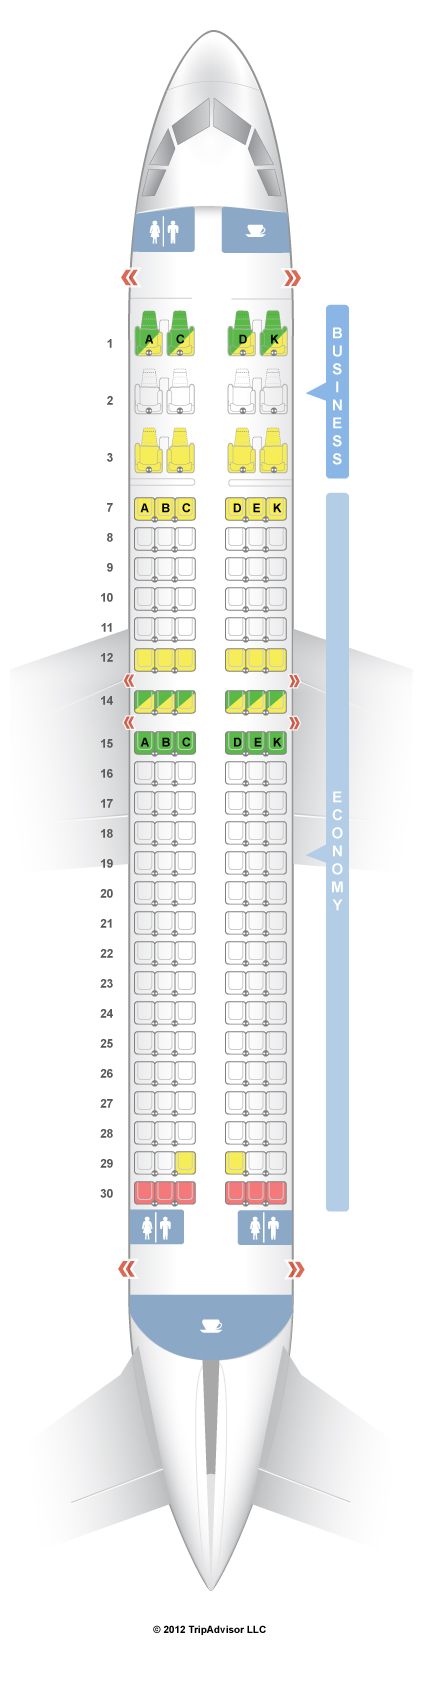 United Airlines Airbus 320 Seating Chart